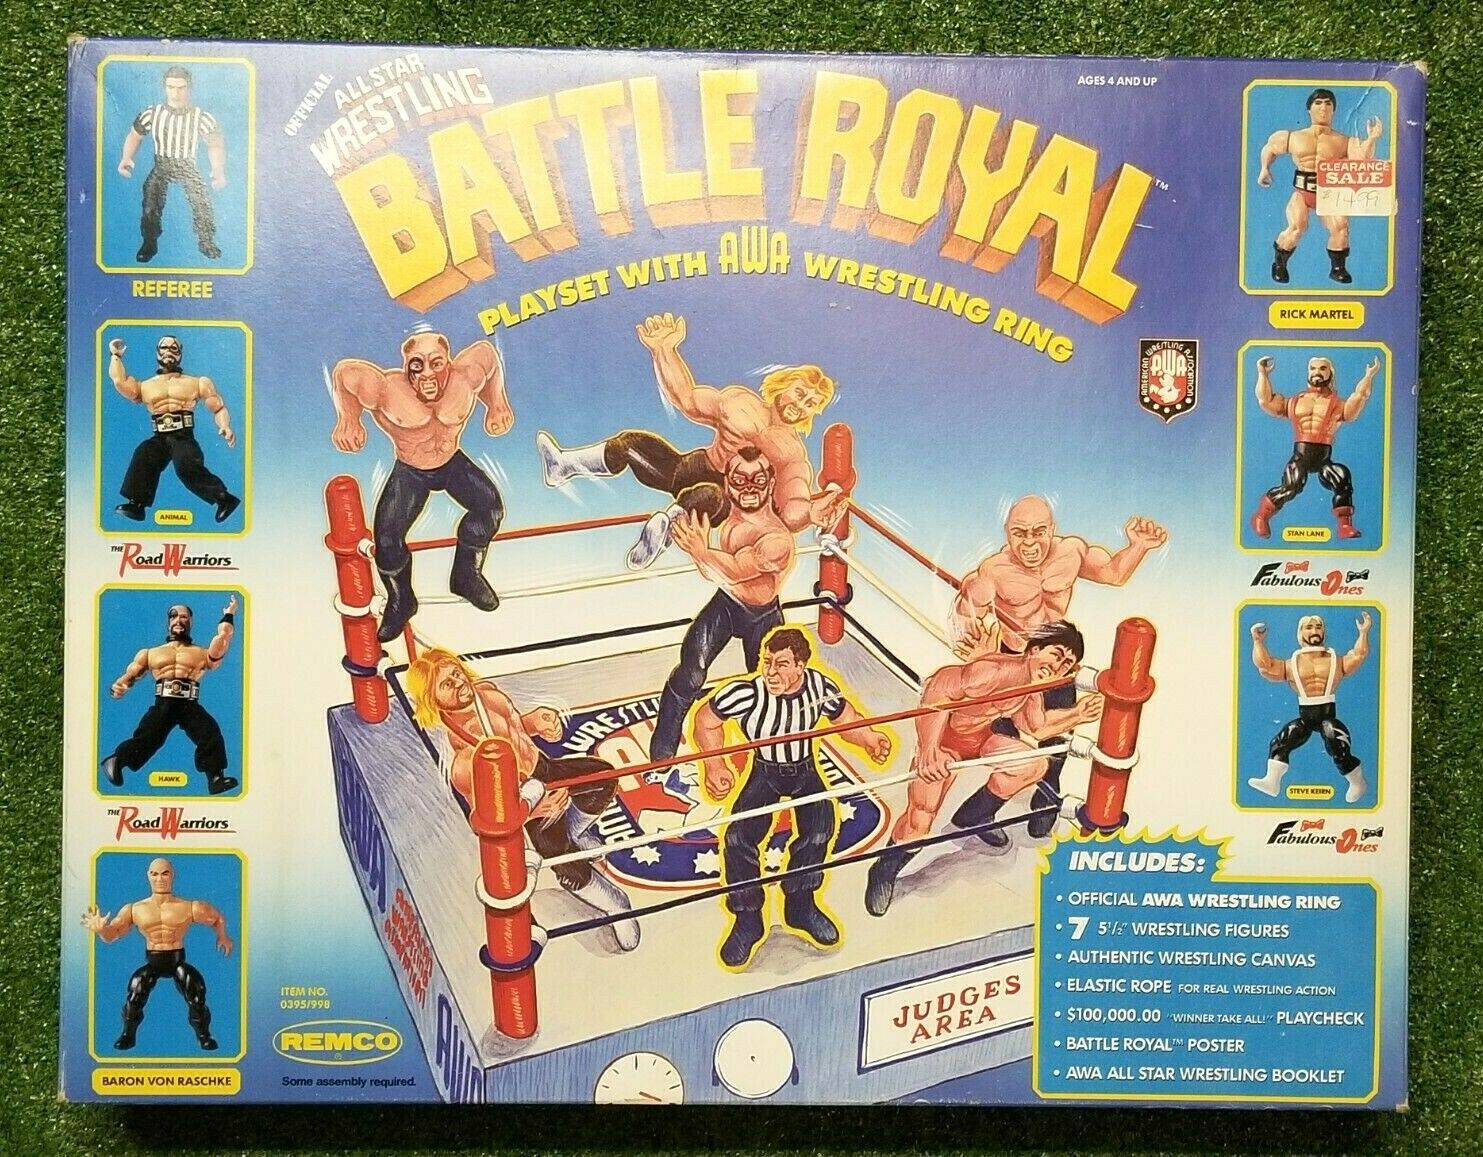 All Generic Referee Wrestling Action Figures